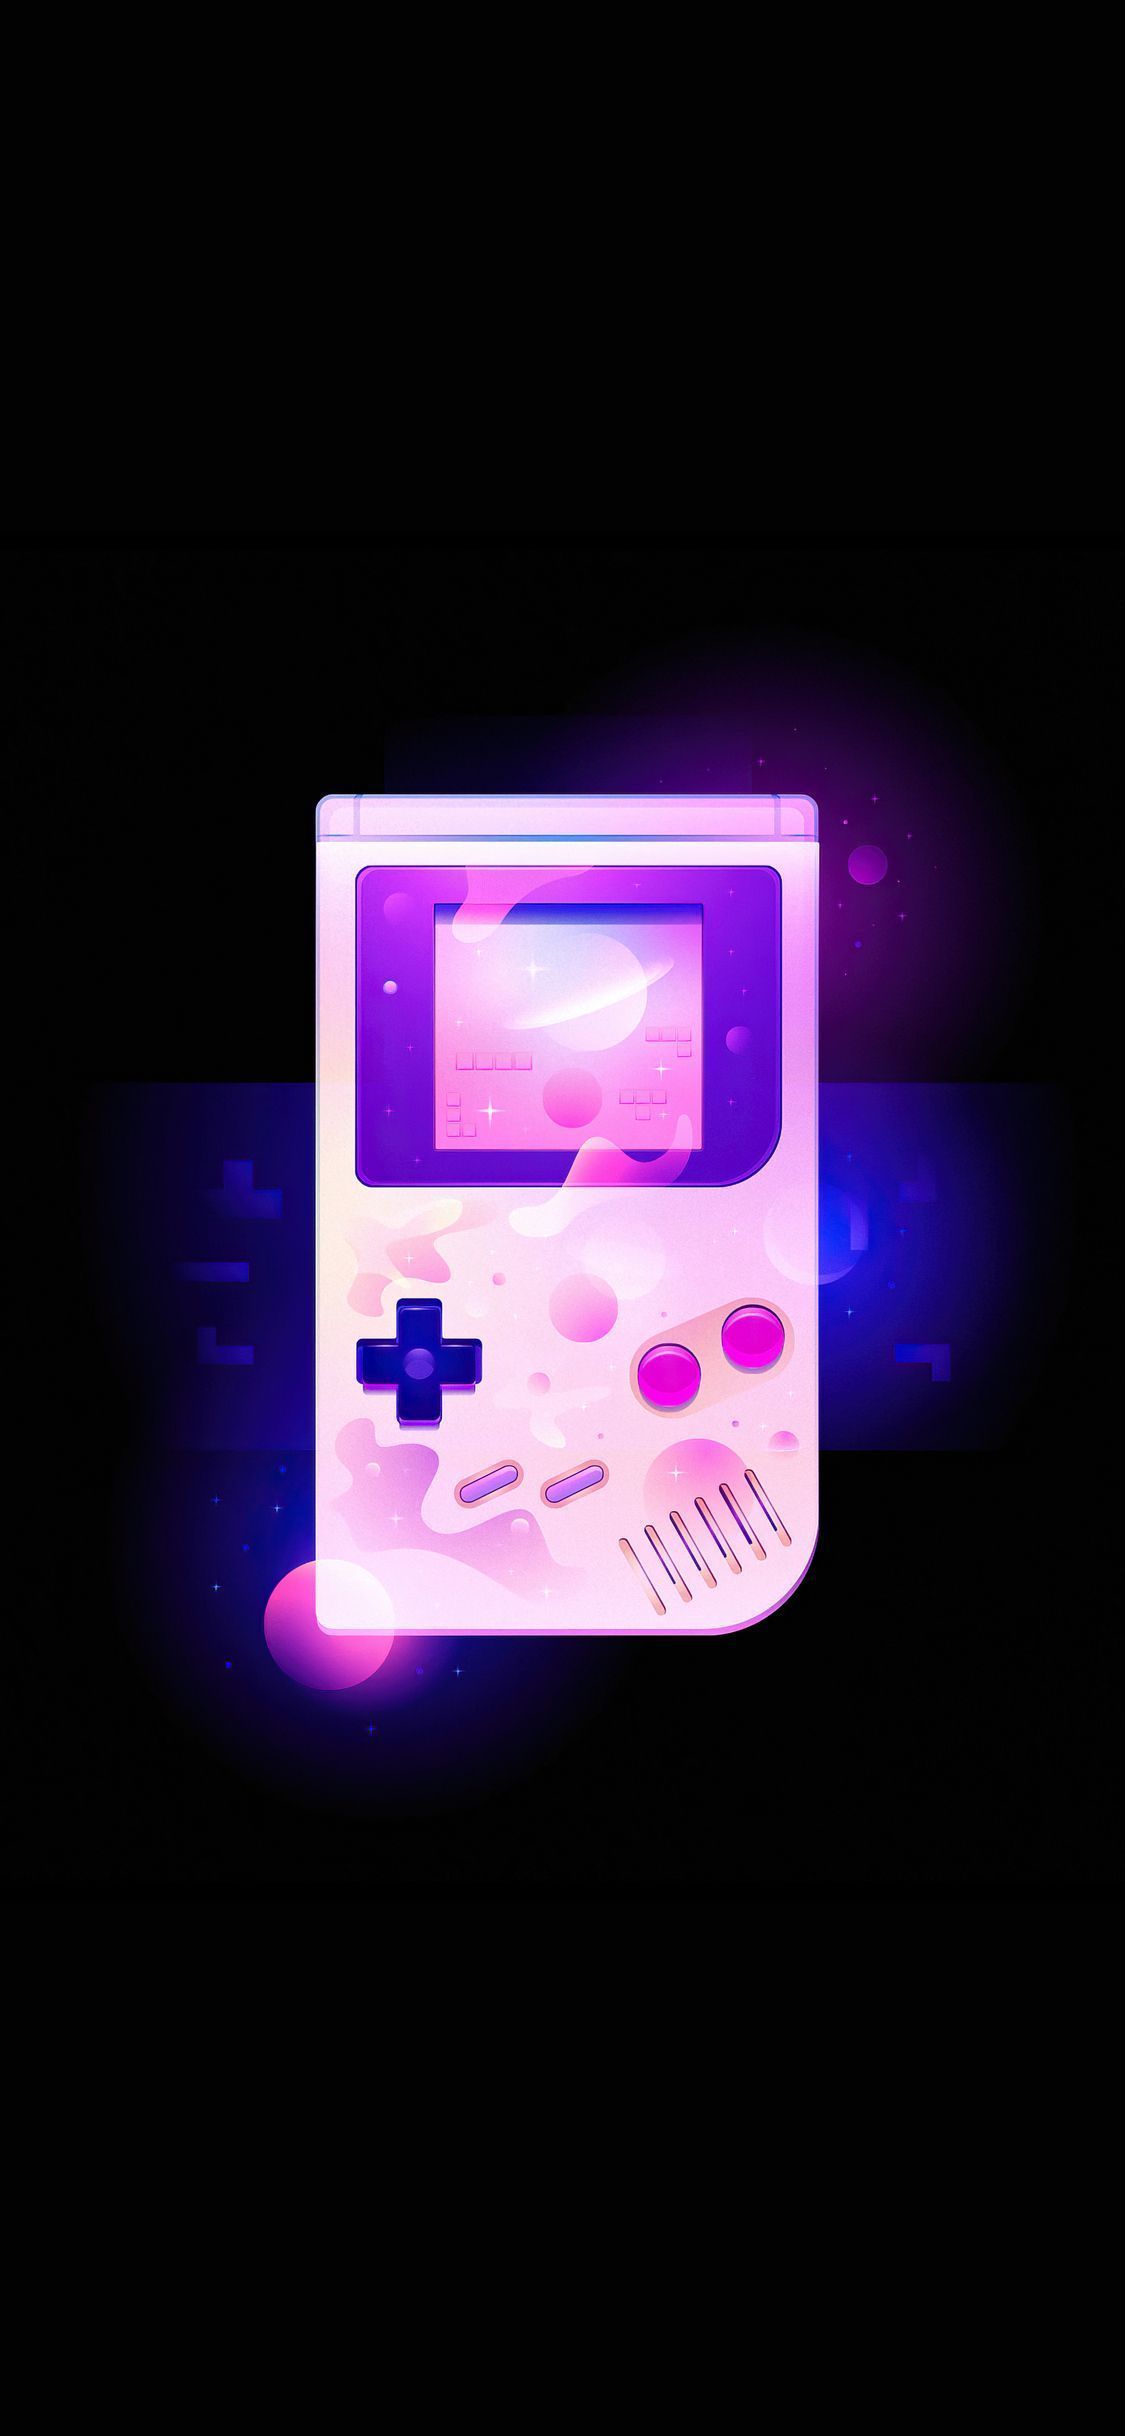 Gameboy Retro Style 4k iPhone XS, iPhone iPhone X HD 4k Wallpaper, Image, Background, Photo and Picture